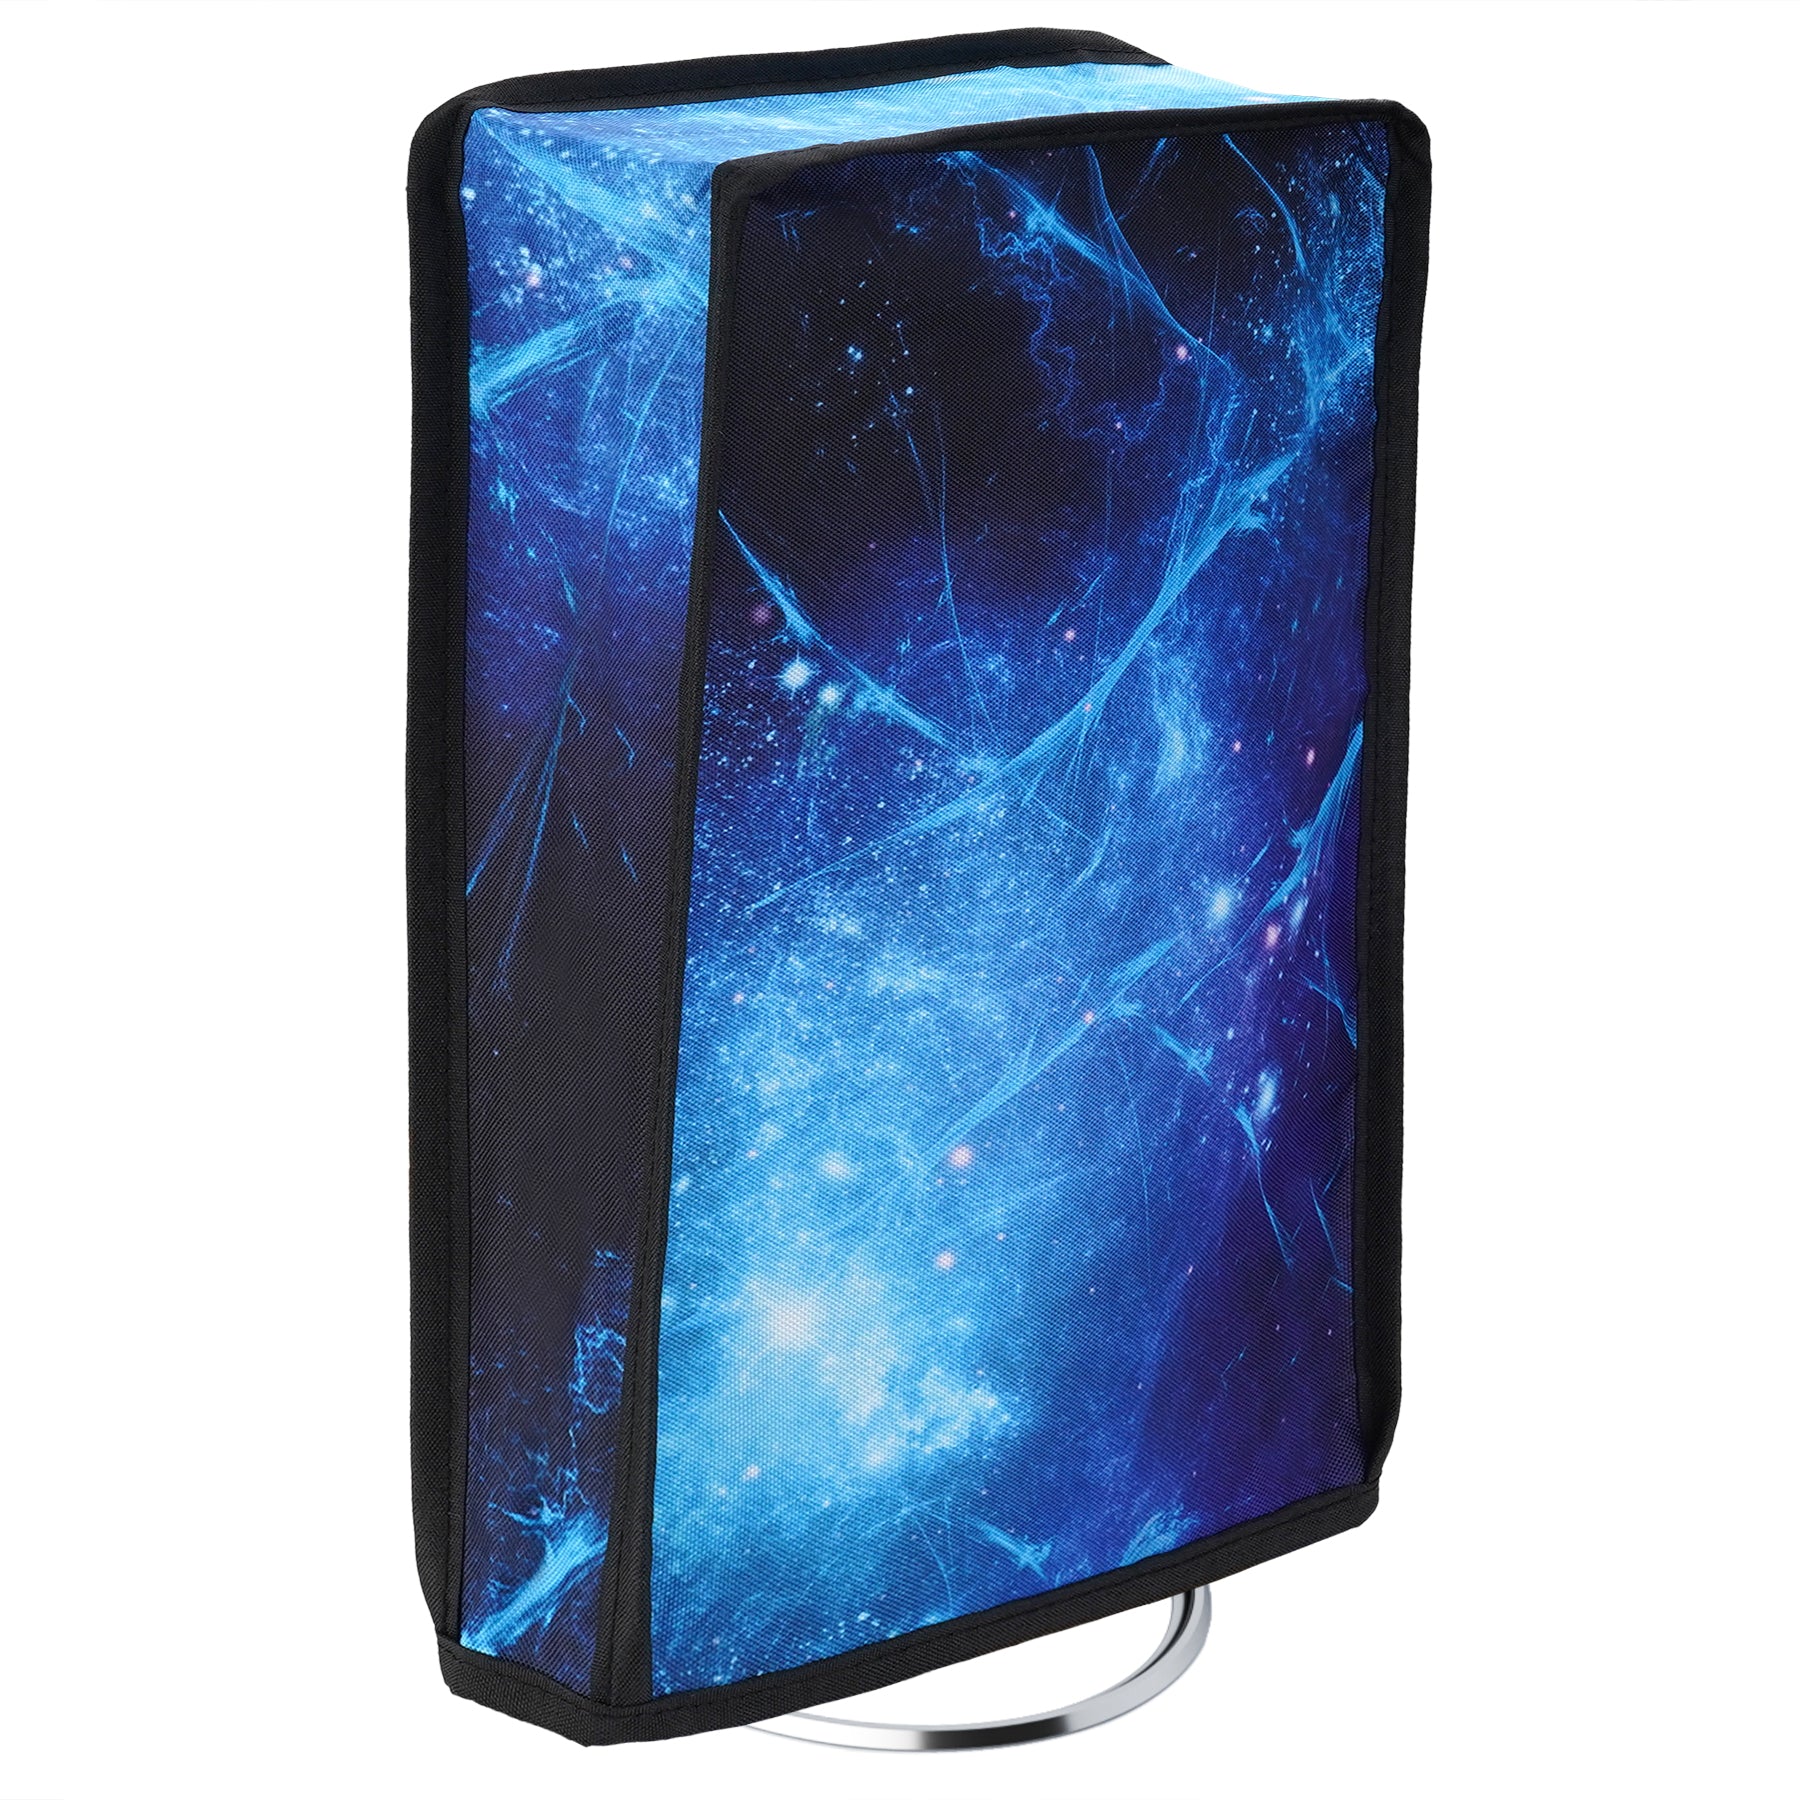 PlayVital Vertical Dust Cover for ps5 Slim Digital Edition(The New Smaller Design), Nylon Dust Proof Protector Waterproof Cover Sleeve for ps5 Slim Console - Blue Nebula - JKSPFH004 PlayVital